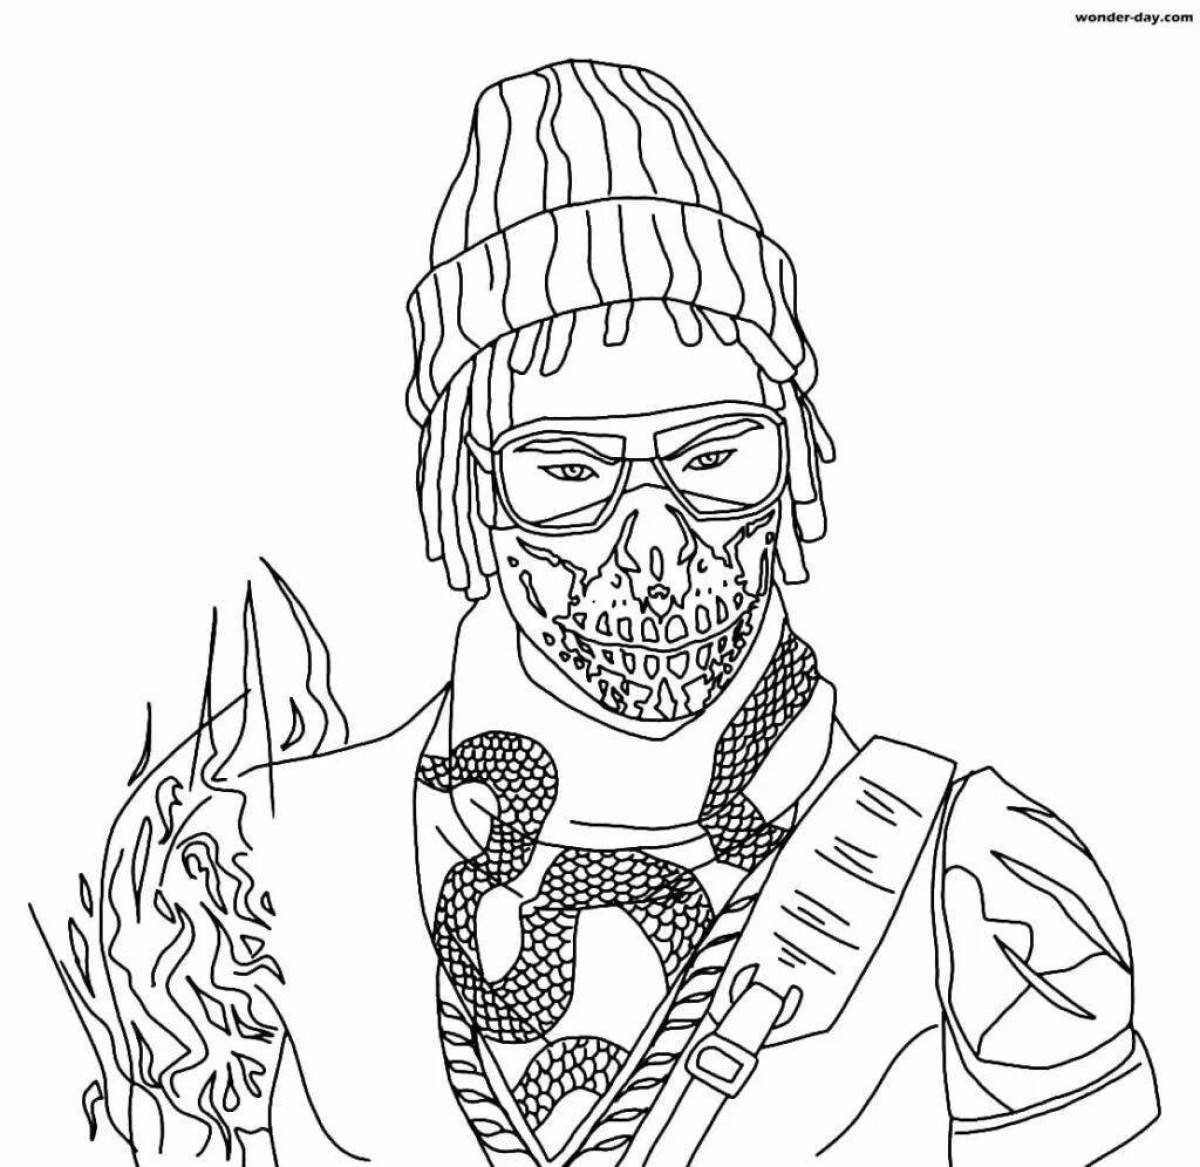 Outstanding free fire coloring page for boys